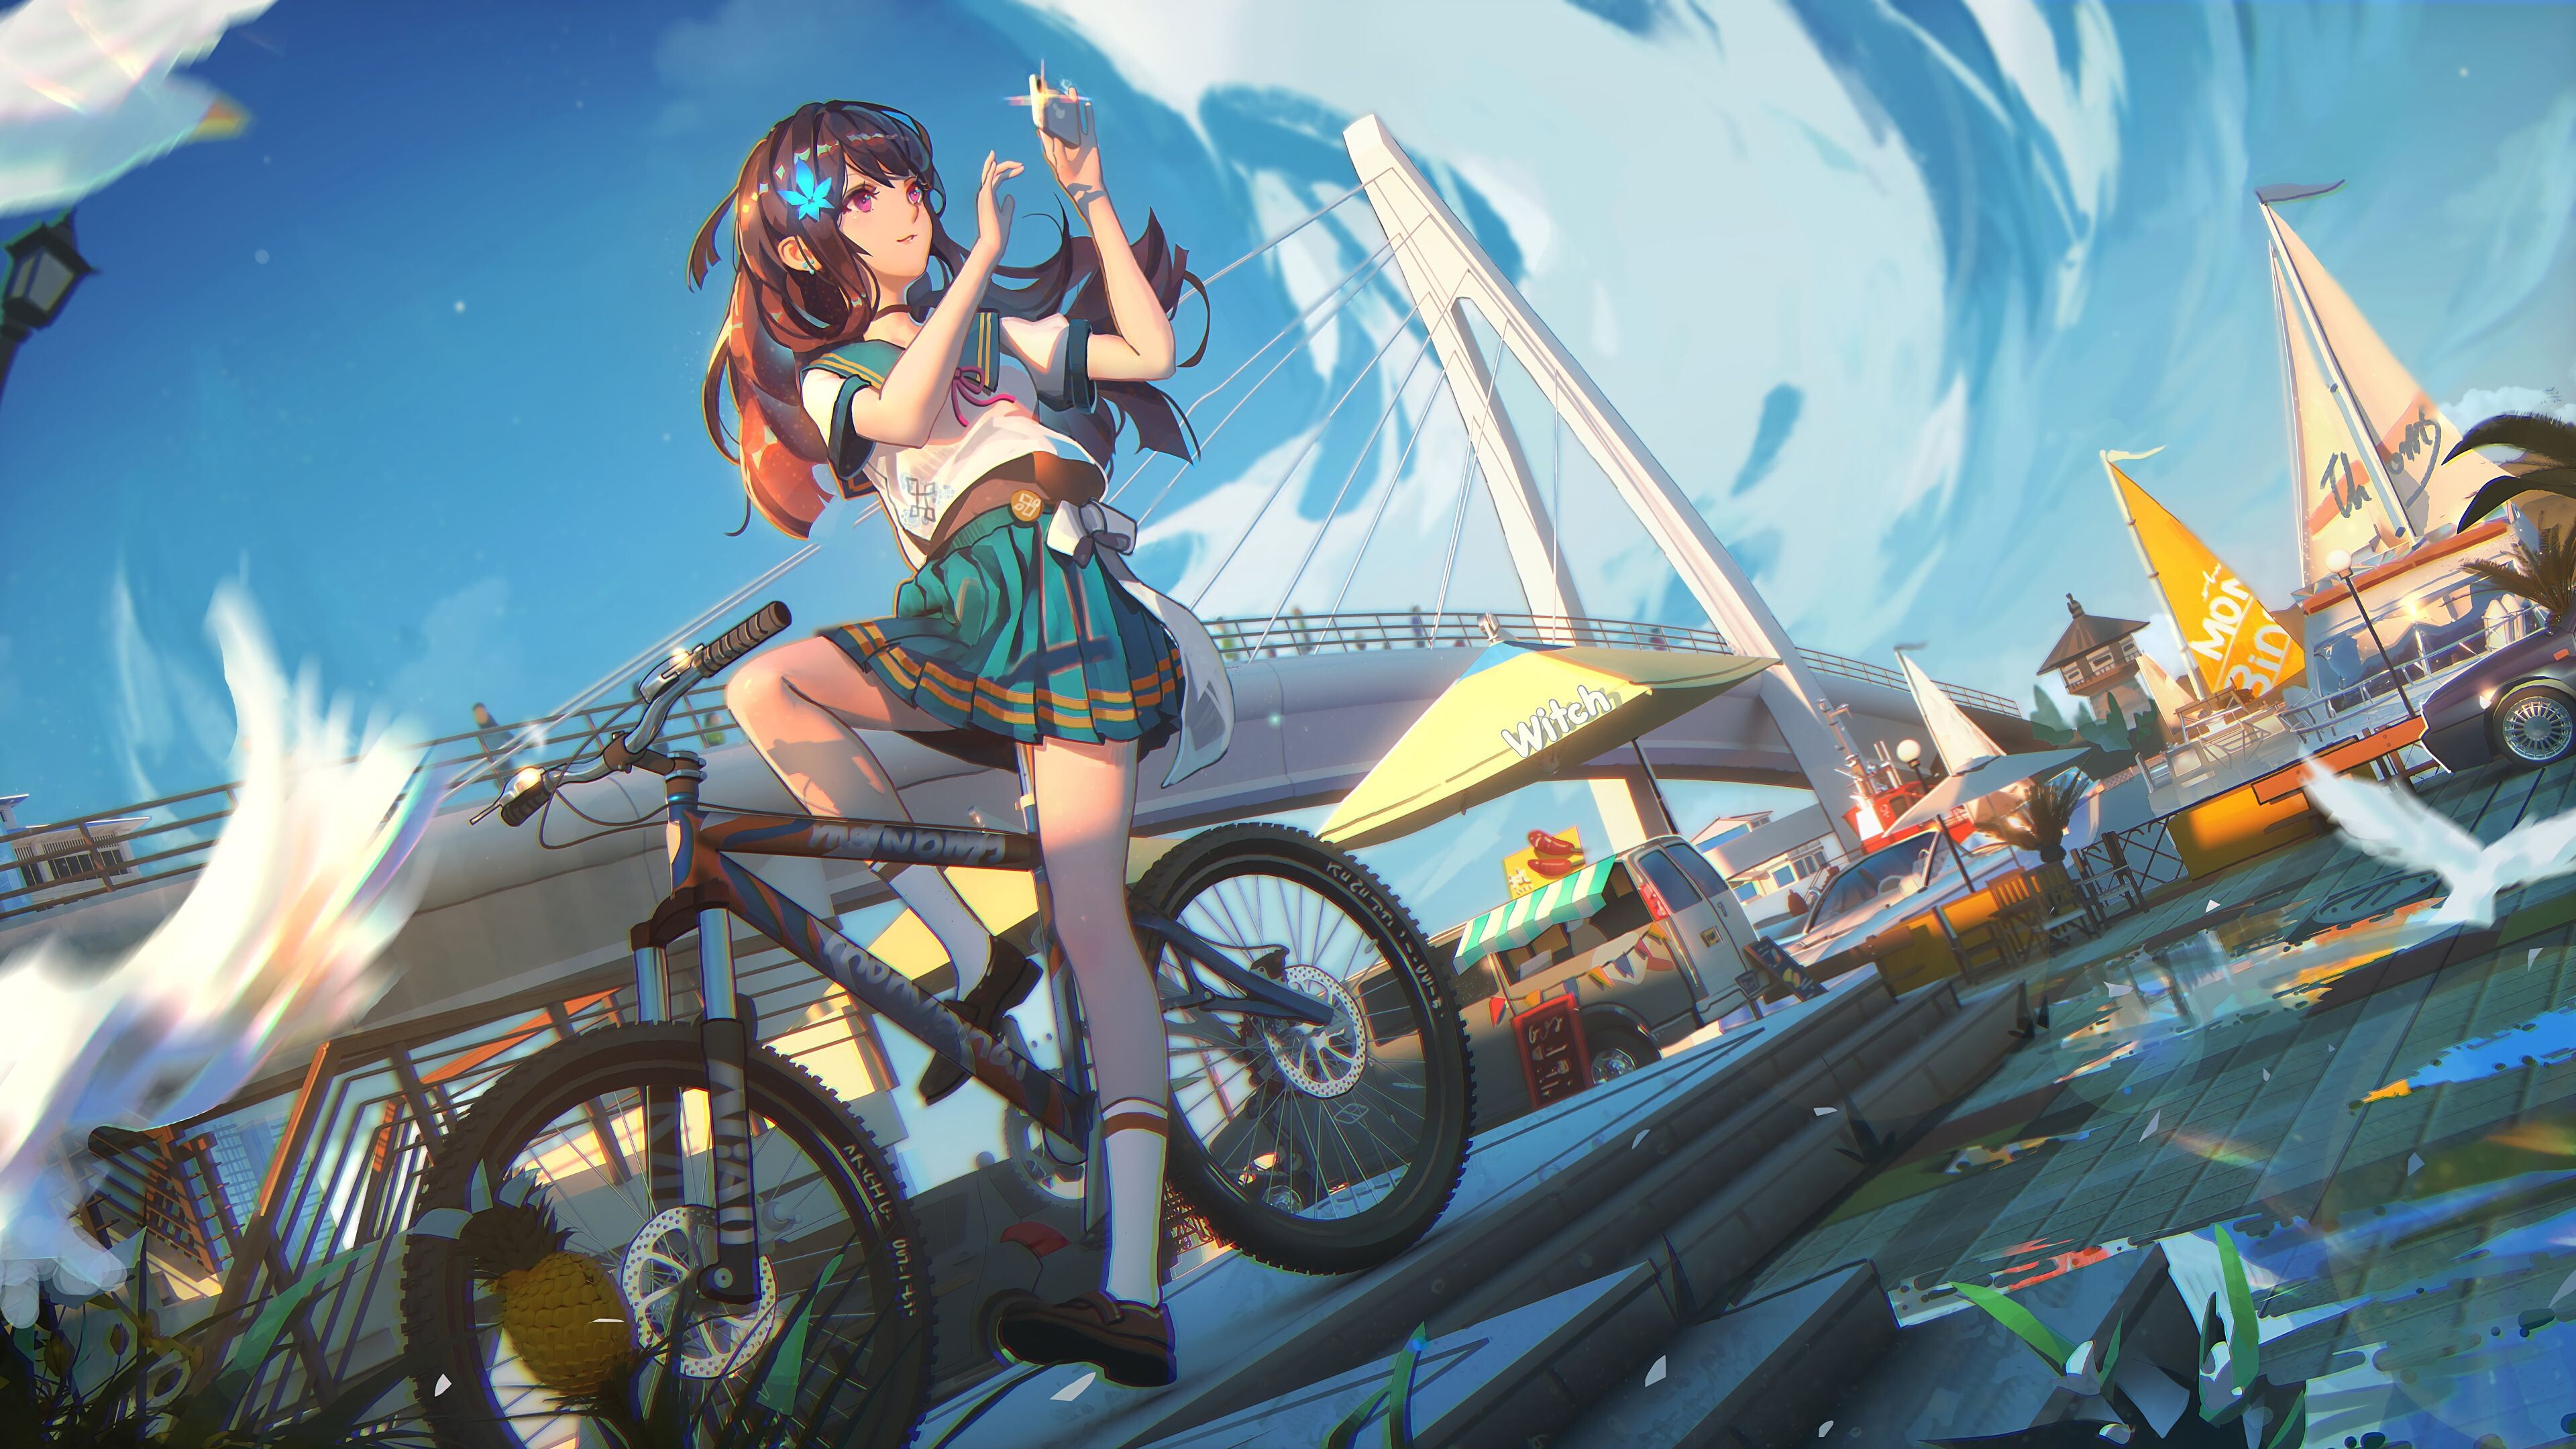 Girl and Bike: Anime girl, Student girl on a bicycle, Cycling in the city, School uniform. 3840x2160 4K Background.